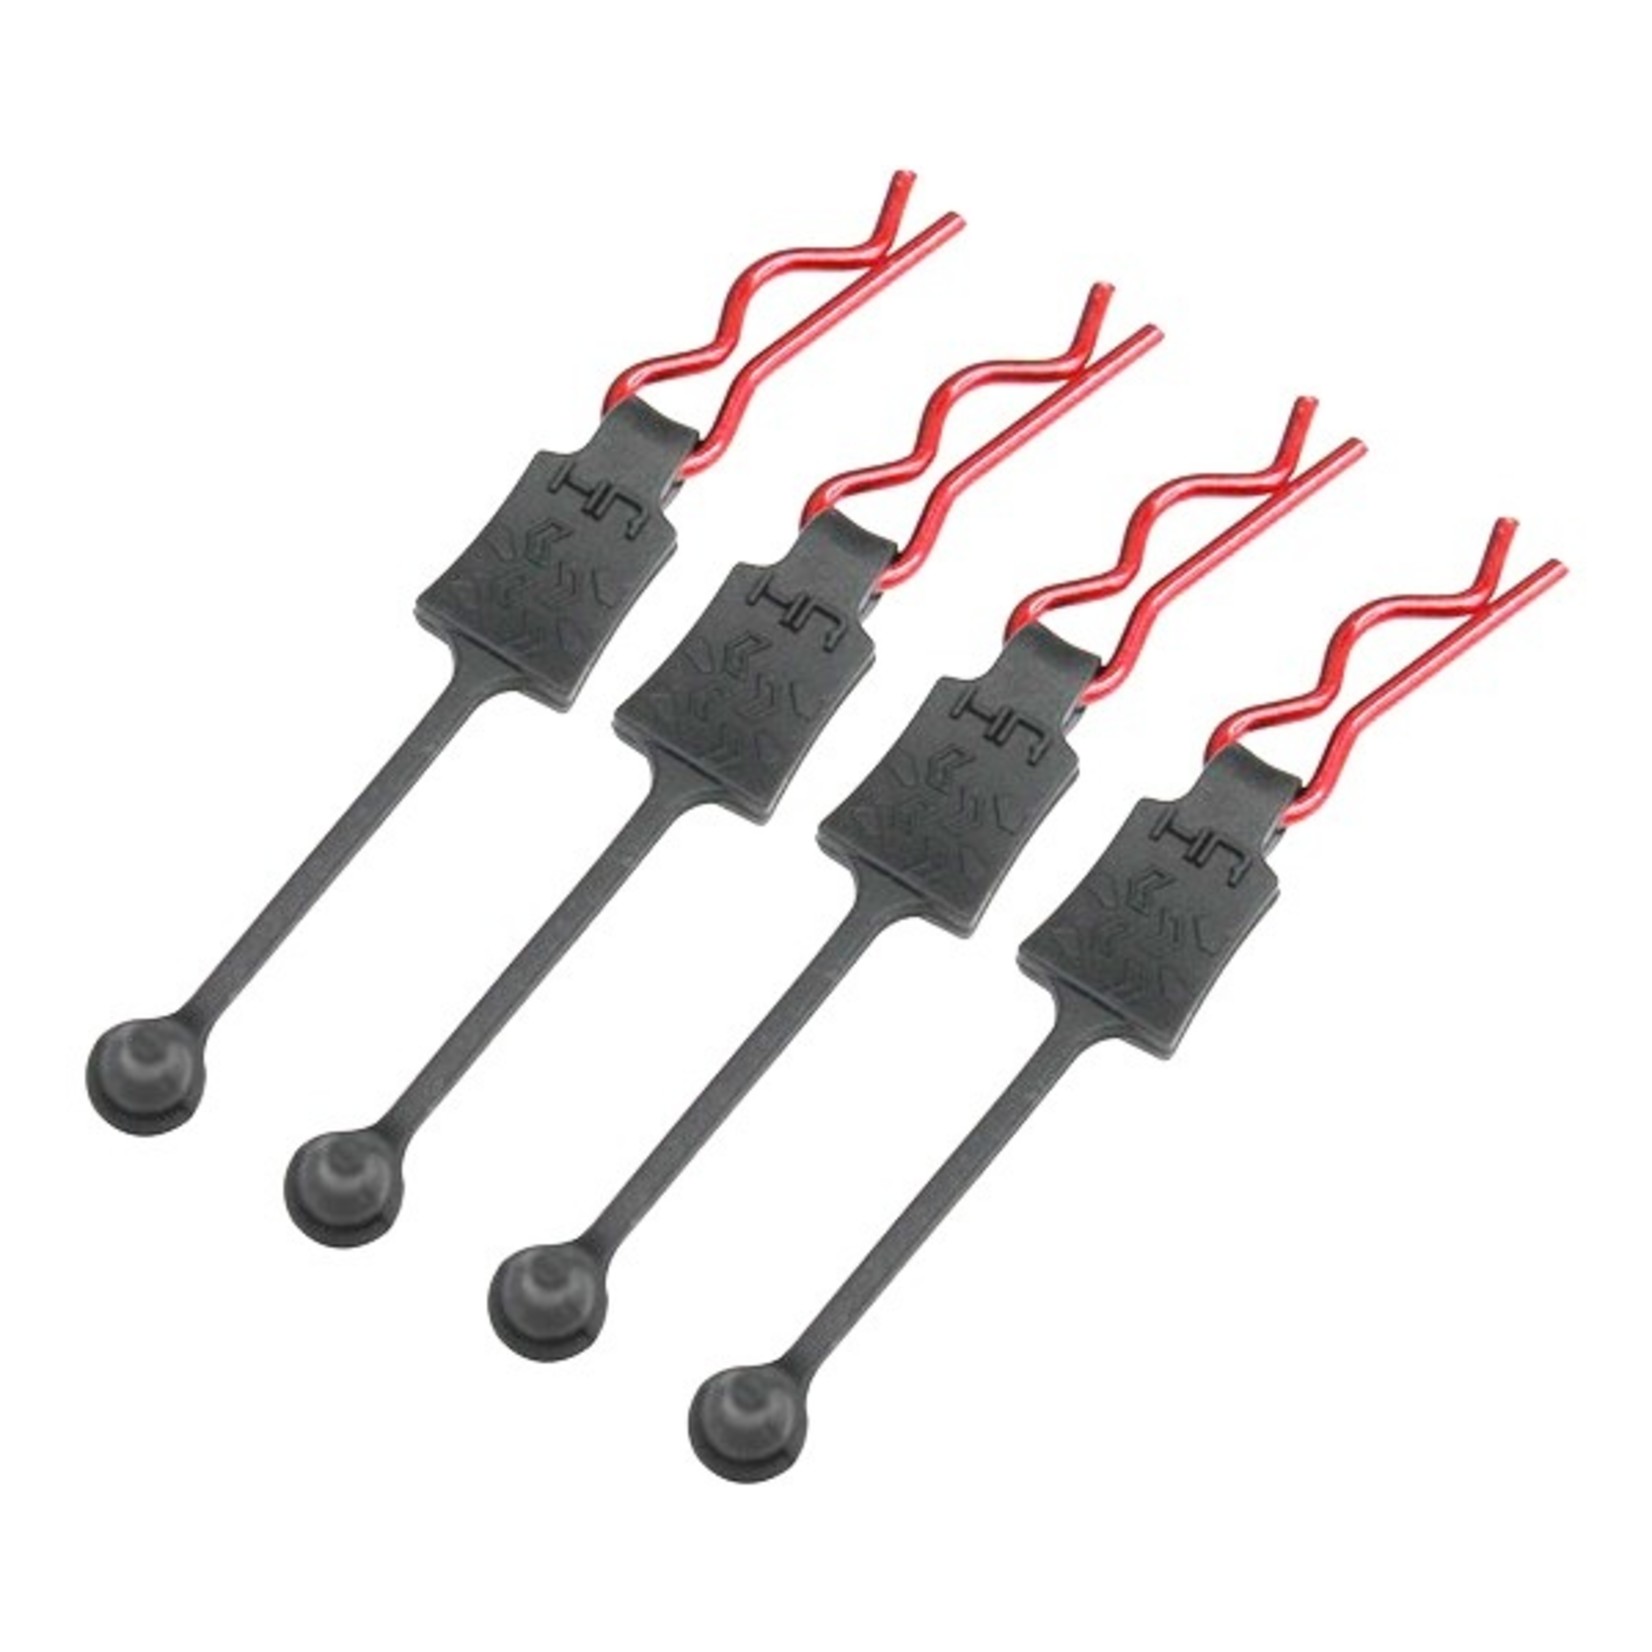 Hot Racing HRABWP39E02 Body Clip Retainers, for 1/8th Scale, Red (4pcs)